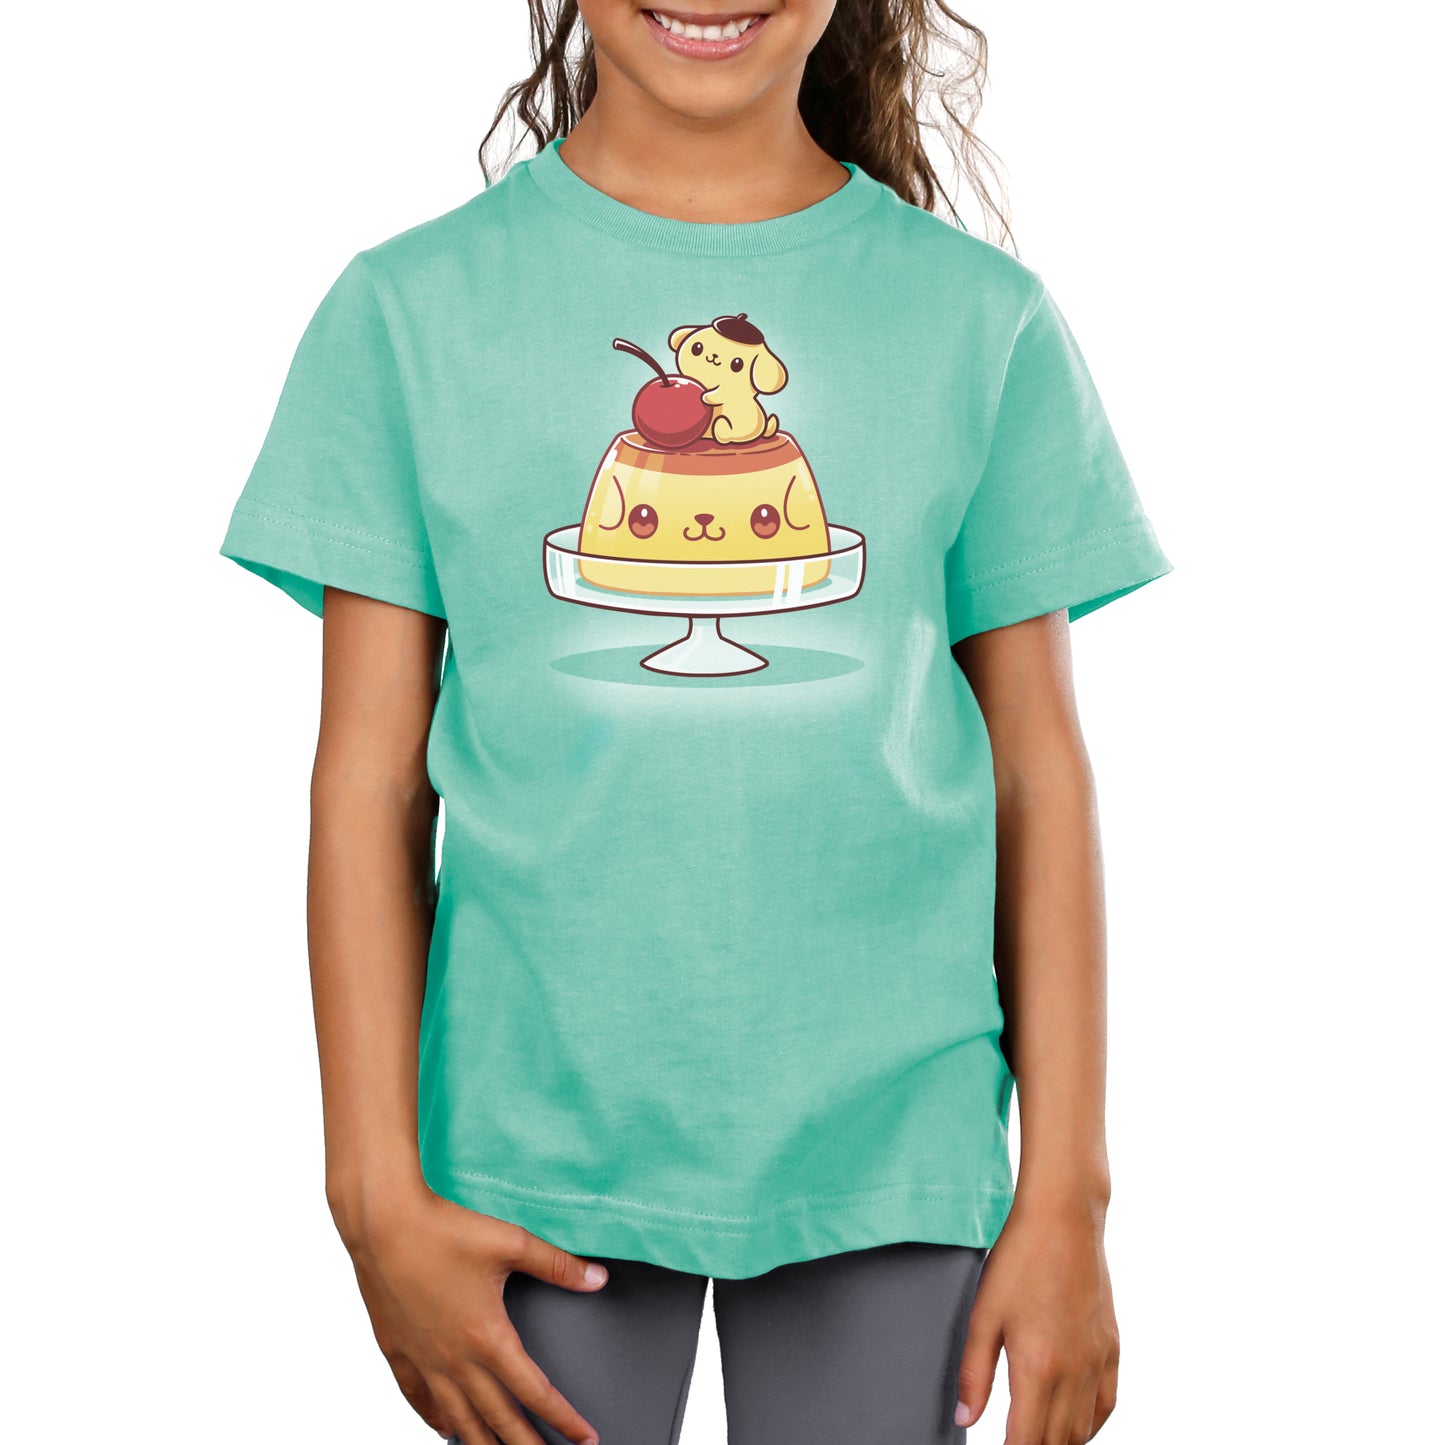 A girl wearing a green Sanrio women's t-shirt with an image of Pompompurin's Pudding on top of a cake.